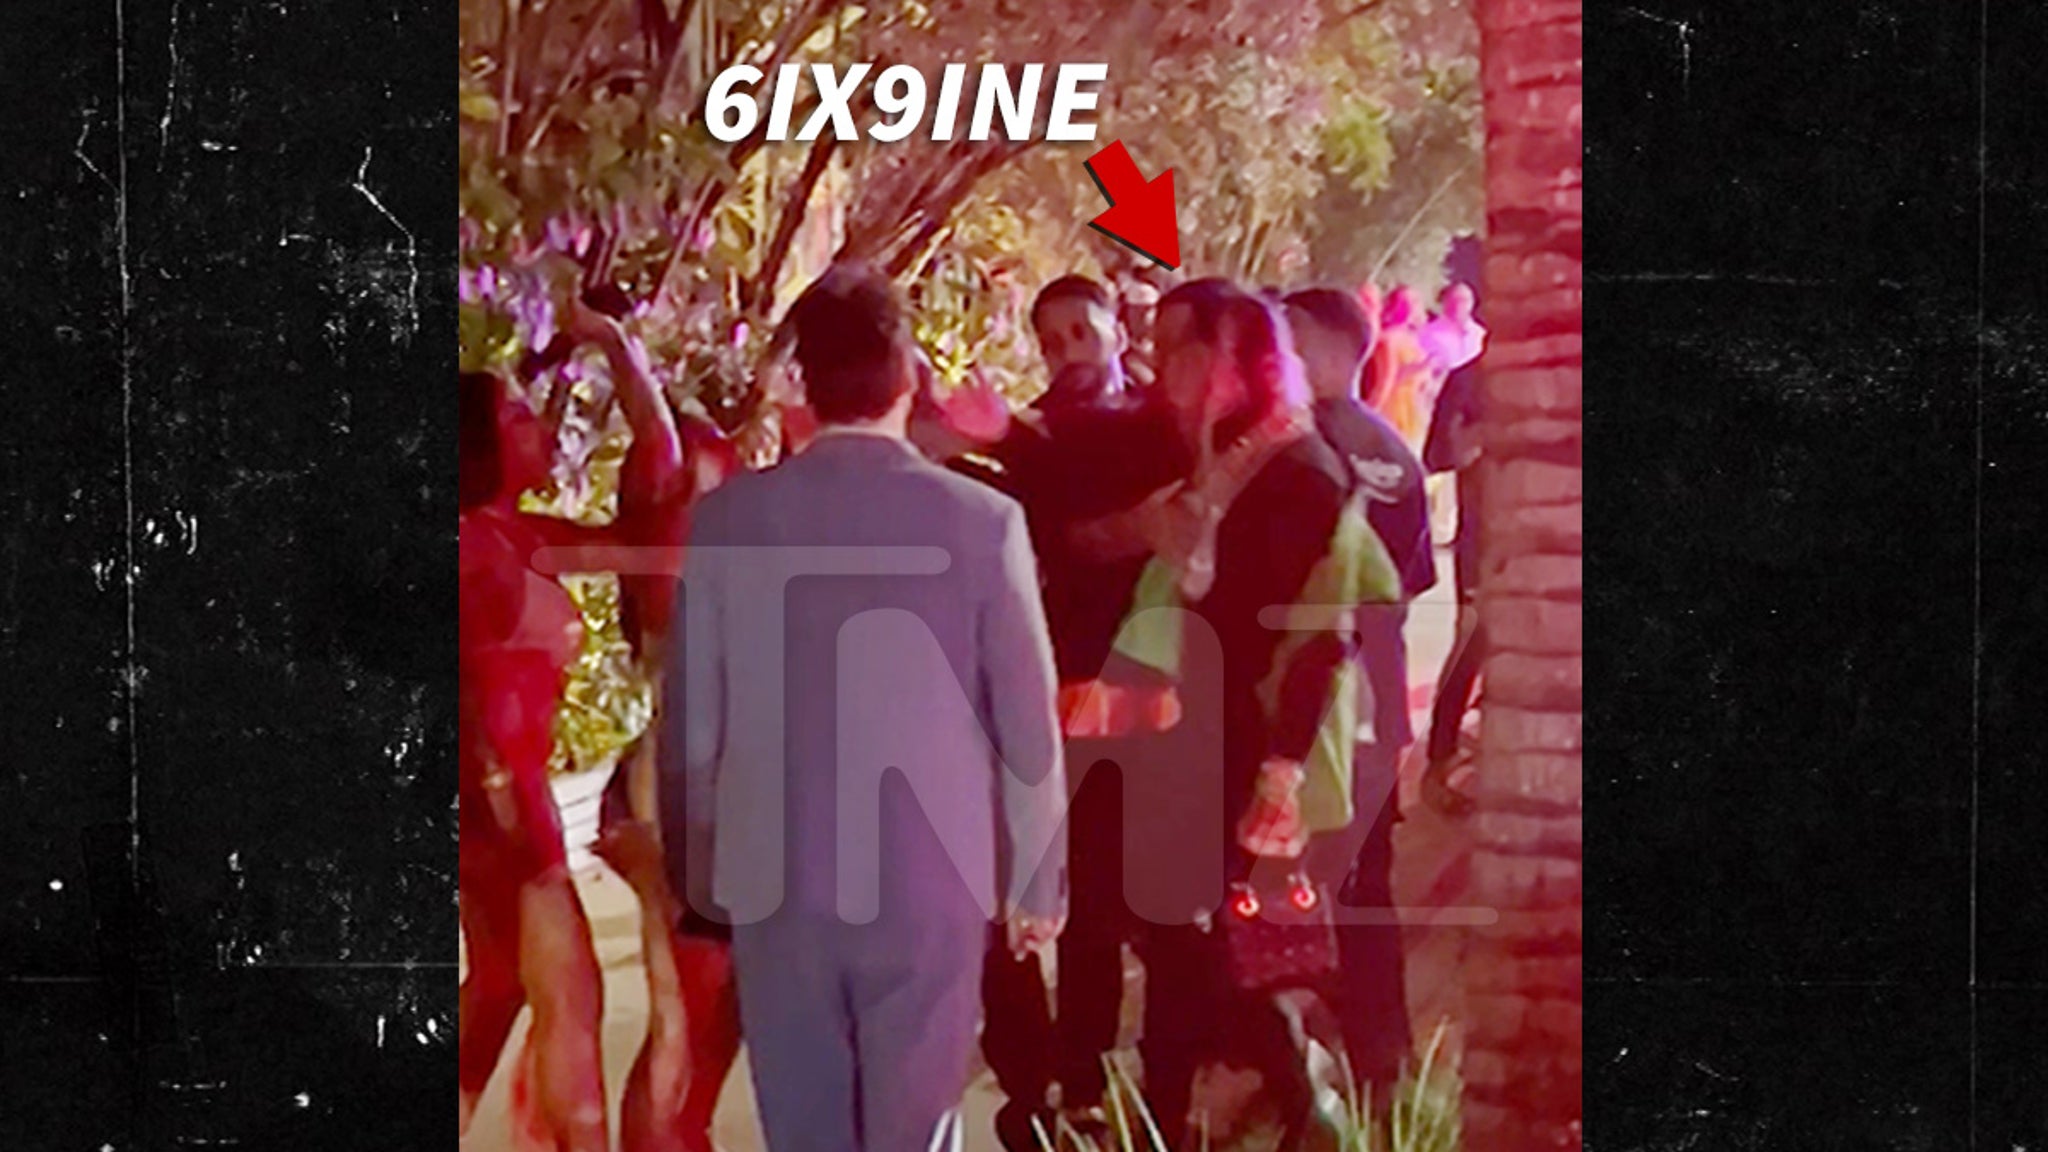 6ix9ine’s Girlfriend Arrested for Domestic Violence After Fight in Miami – TMZ